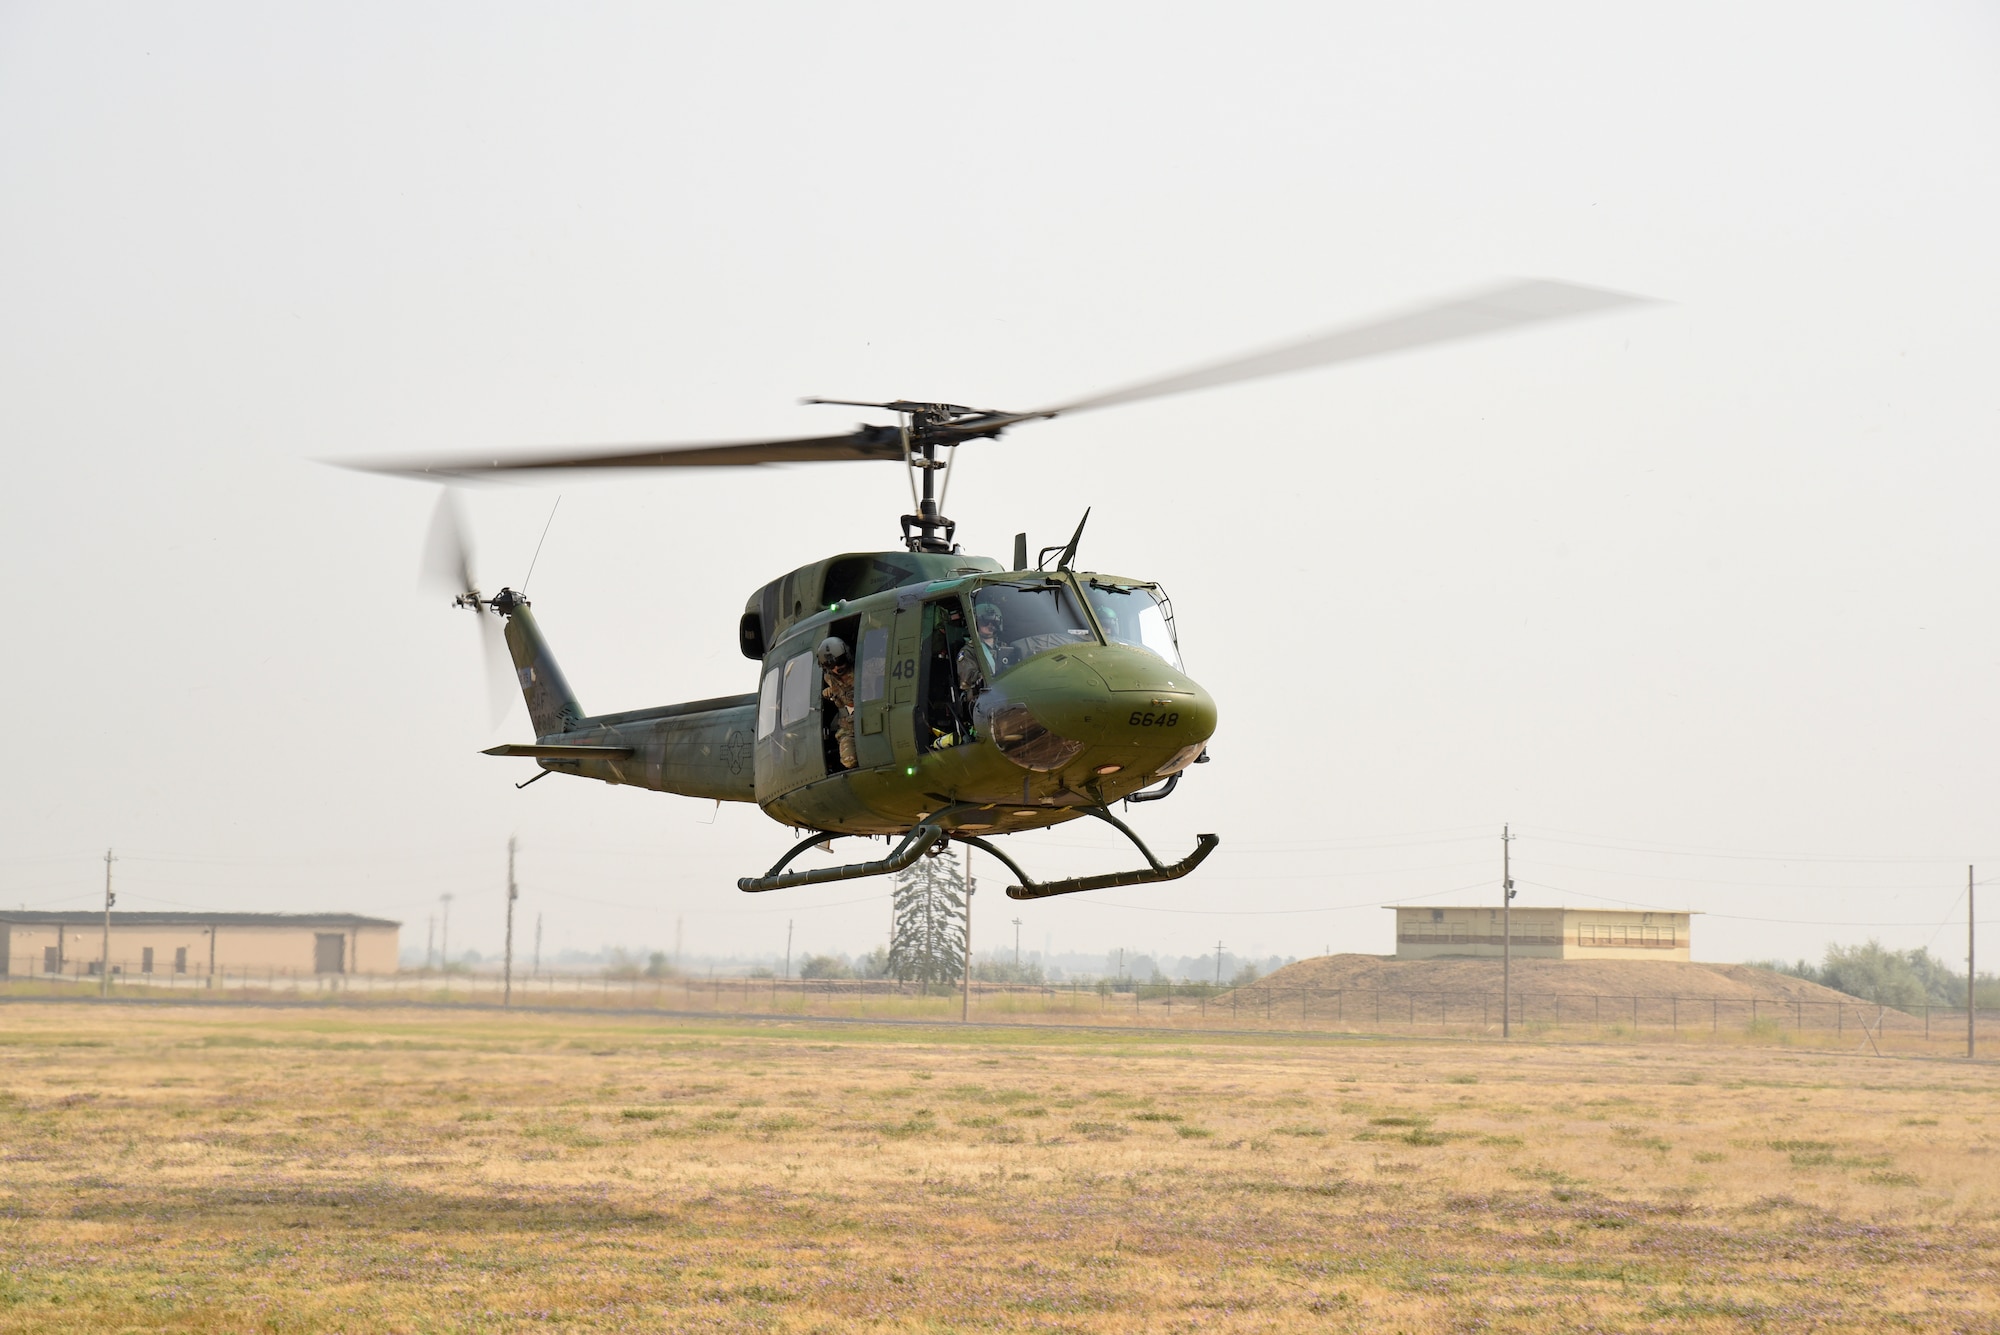 Throughout the month of August, the 92nd Security Forces Squadron Military Working Dog section trained with the 36th Rescue Squadron to learn and become familiar with the components of a huey aircraft. In addition to learning the nomenclature of a UH-1N Huey, the MWD teams were subjected to stimuli commonly found in a deployed location. (U.S. Air Force photo/Staff Sgt. Mackenzie Mendez)